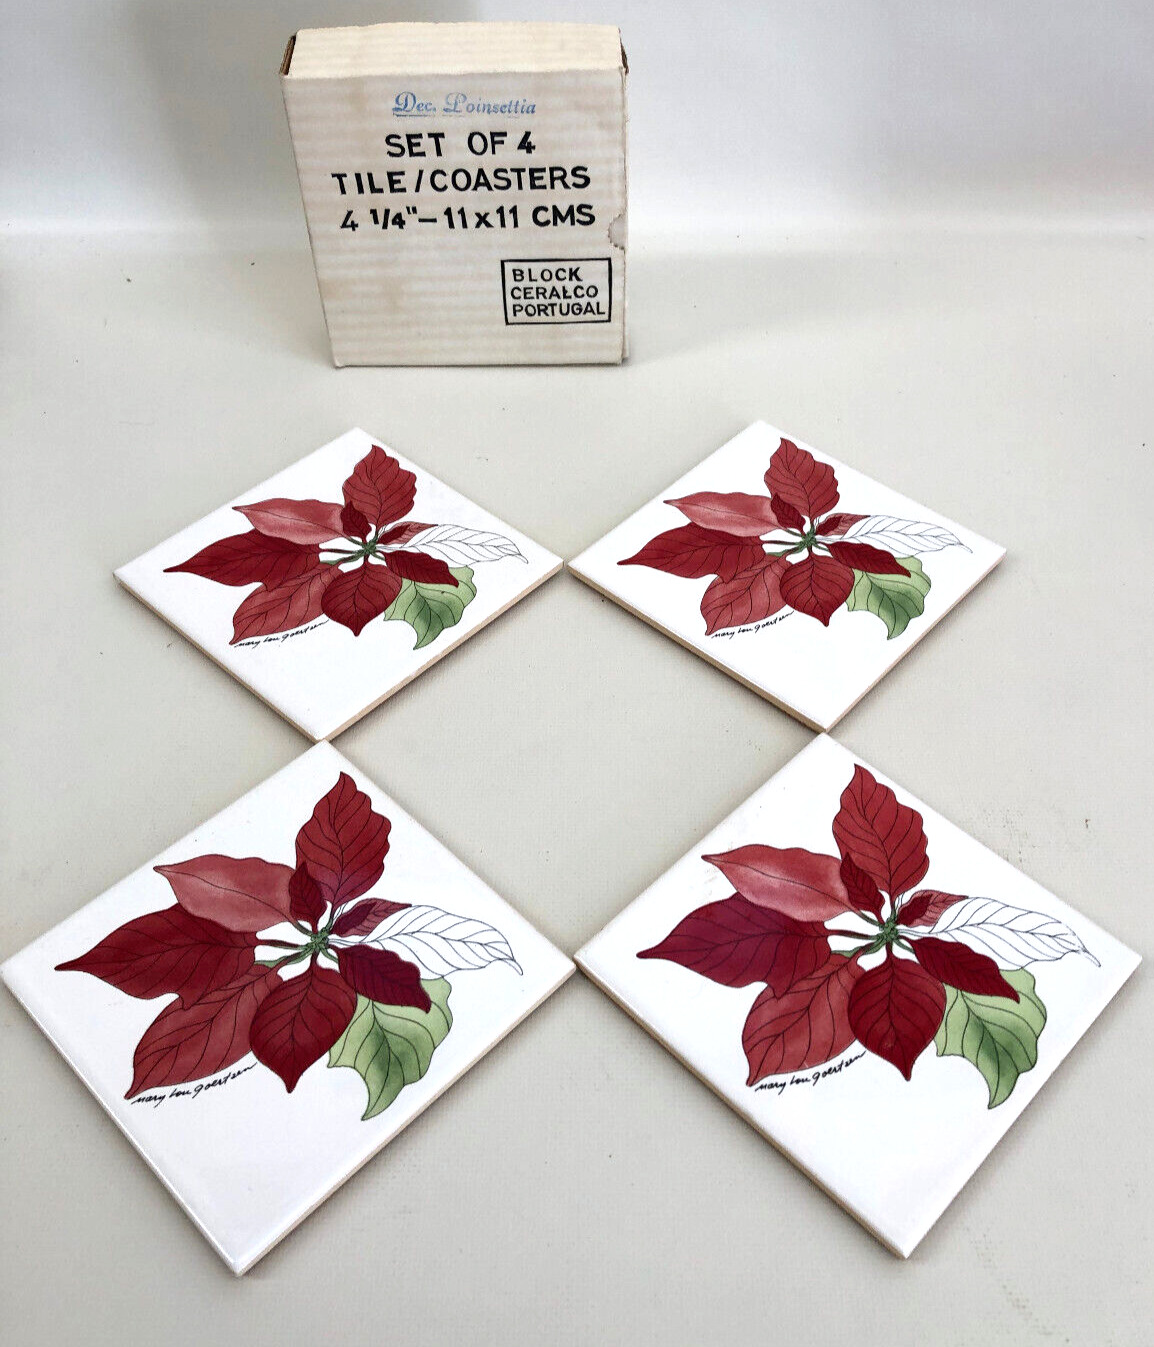 Set of 4 Block Spal Poinsettia Tiles Coasters Trivets Ceralco, Portugal 1982